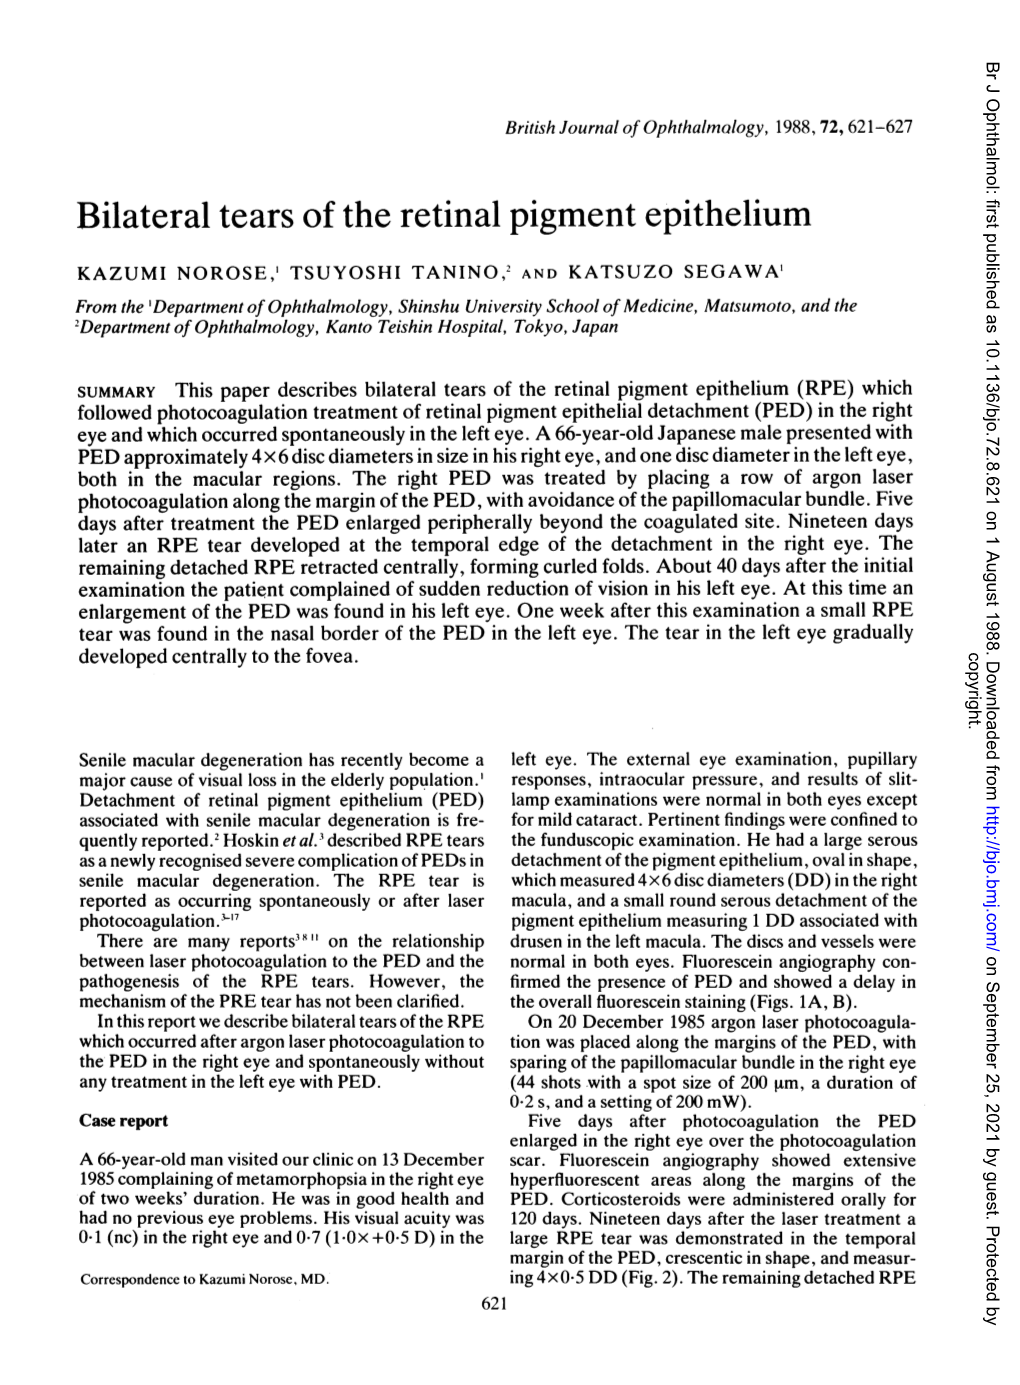 Bilateral Tears of the Retinal Pigment Epithelium